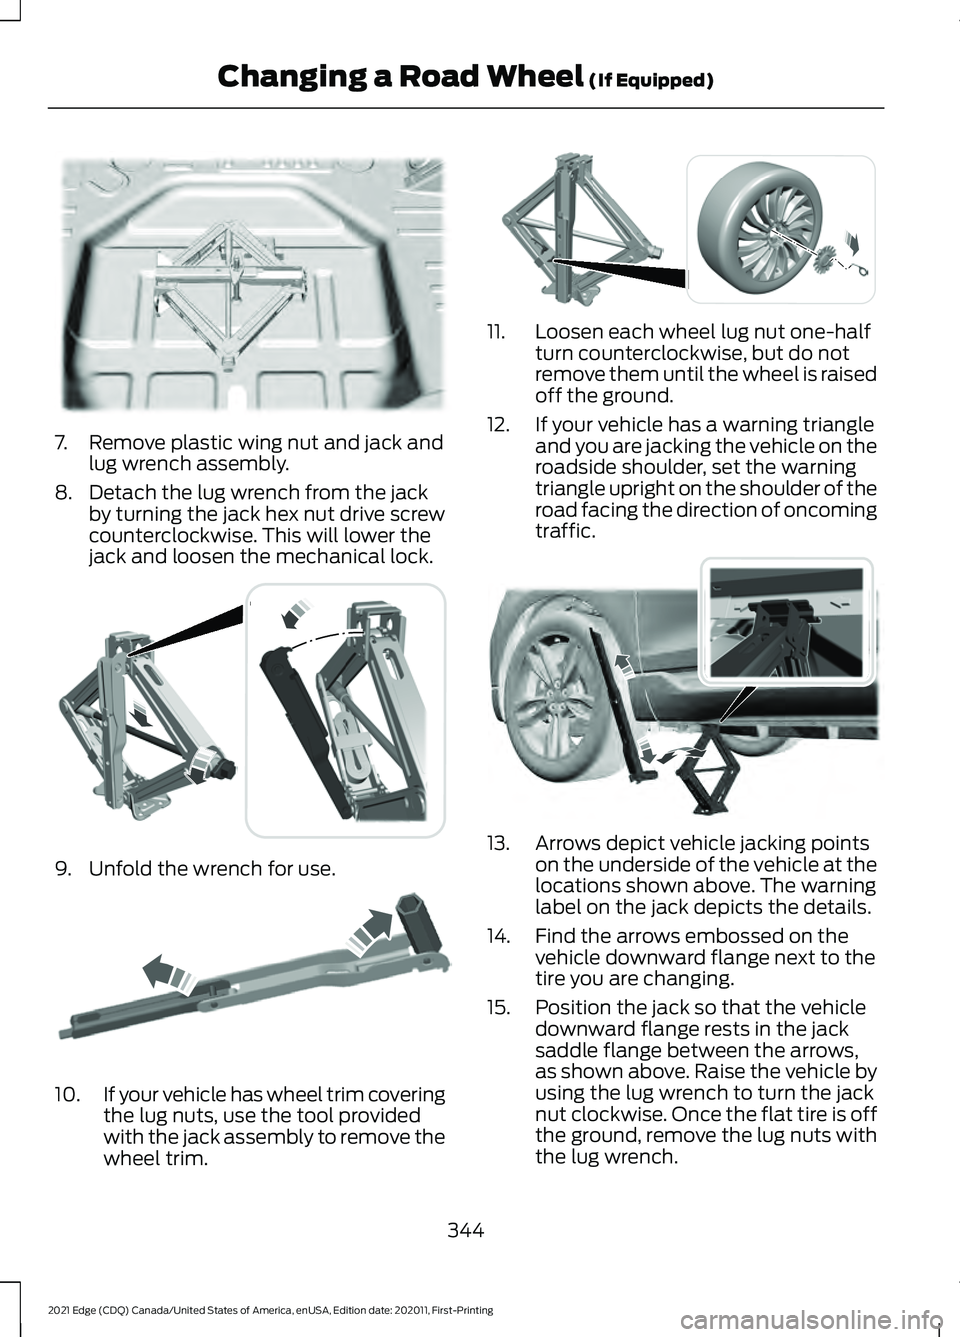 FORD EDGE 2021  Owners Manual 7. Remove plastic wing nut and jack and
lug wrench assembly.
8. Detach the lug wrench from the jack by turning the jack hex nut drive screw
counterclockwise. This will lower the
jack and loosen the me